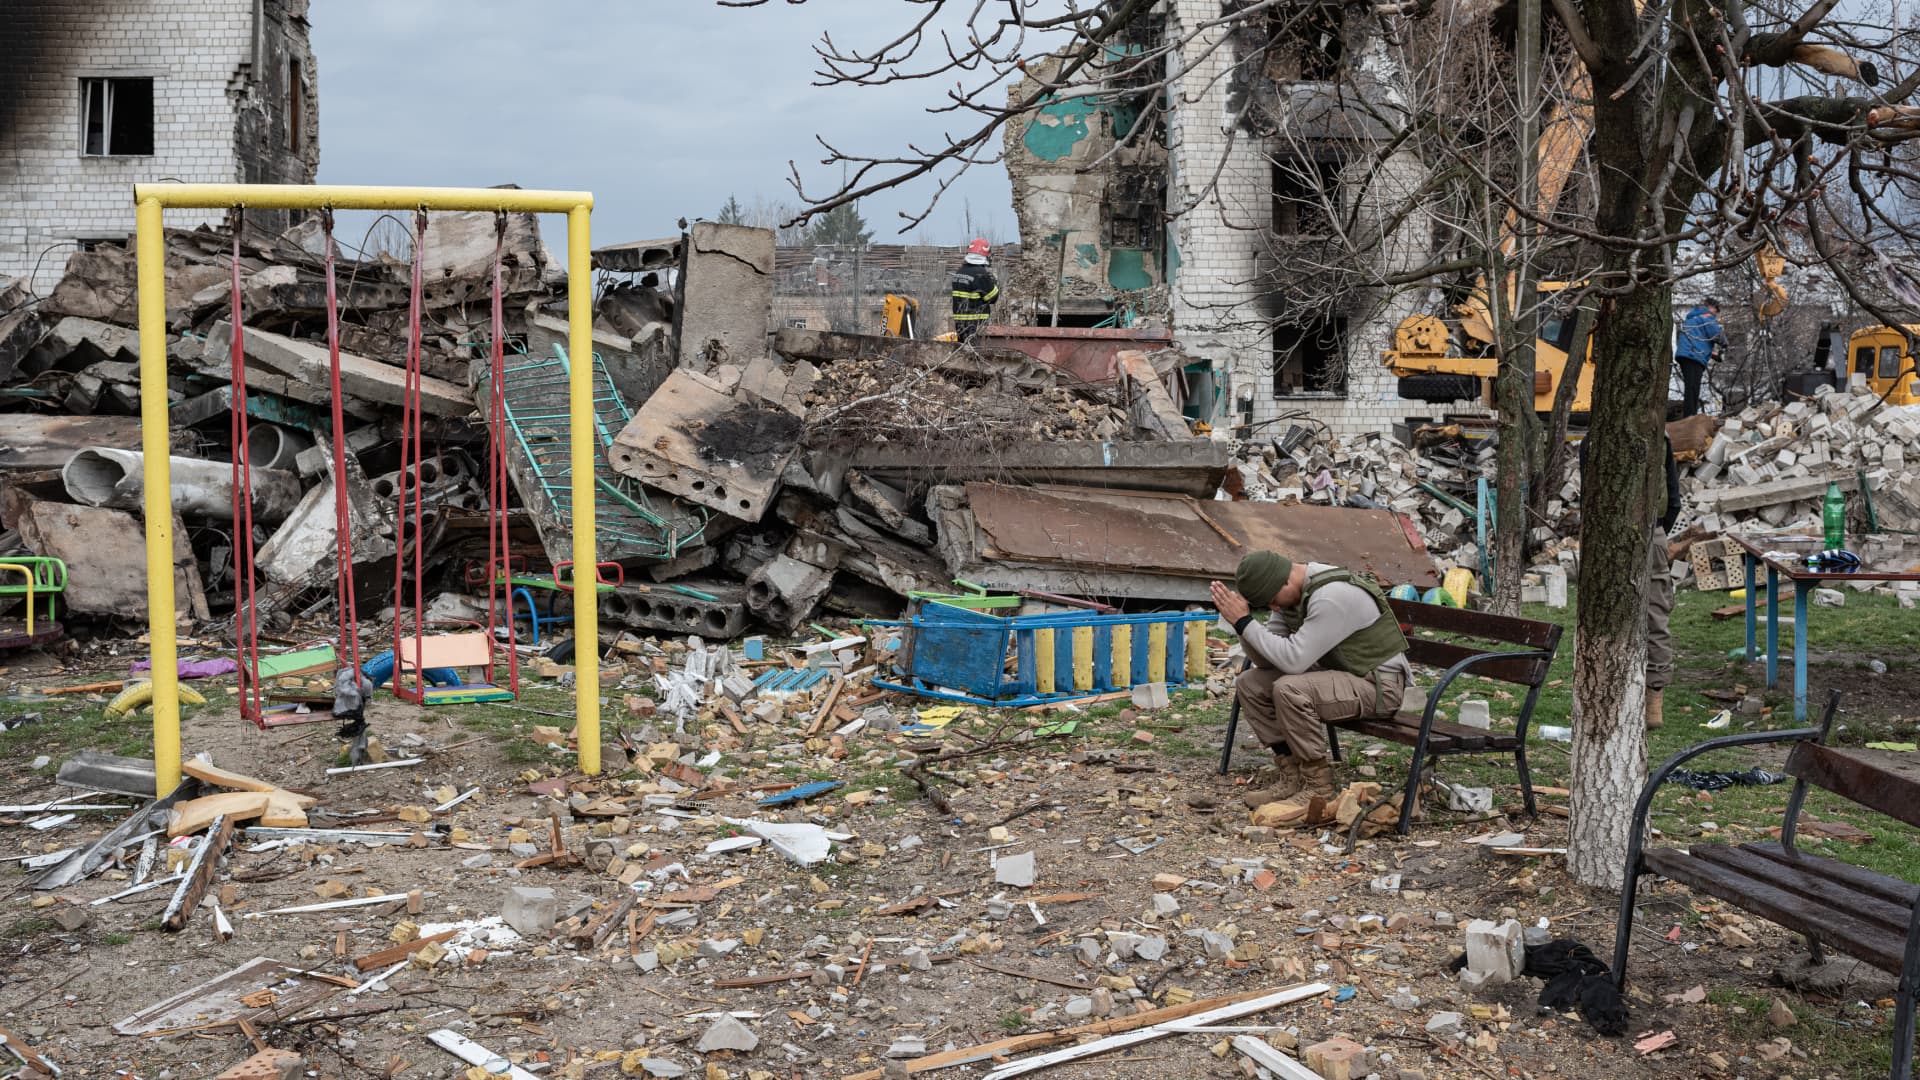 Leo, 22, a volunteer from the US, prays by the destroyed apartment building on April 9, 2022 in Borodianka, Ukraine. The Russian retreat from towns near Kyiv has revealed scores of civilian deaths and the full extent of devastation from Russia's attempt to seize the Ukrainian capital.